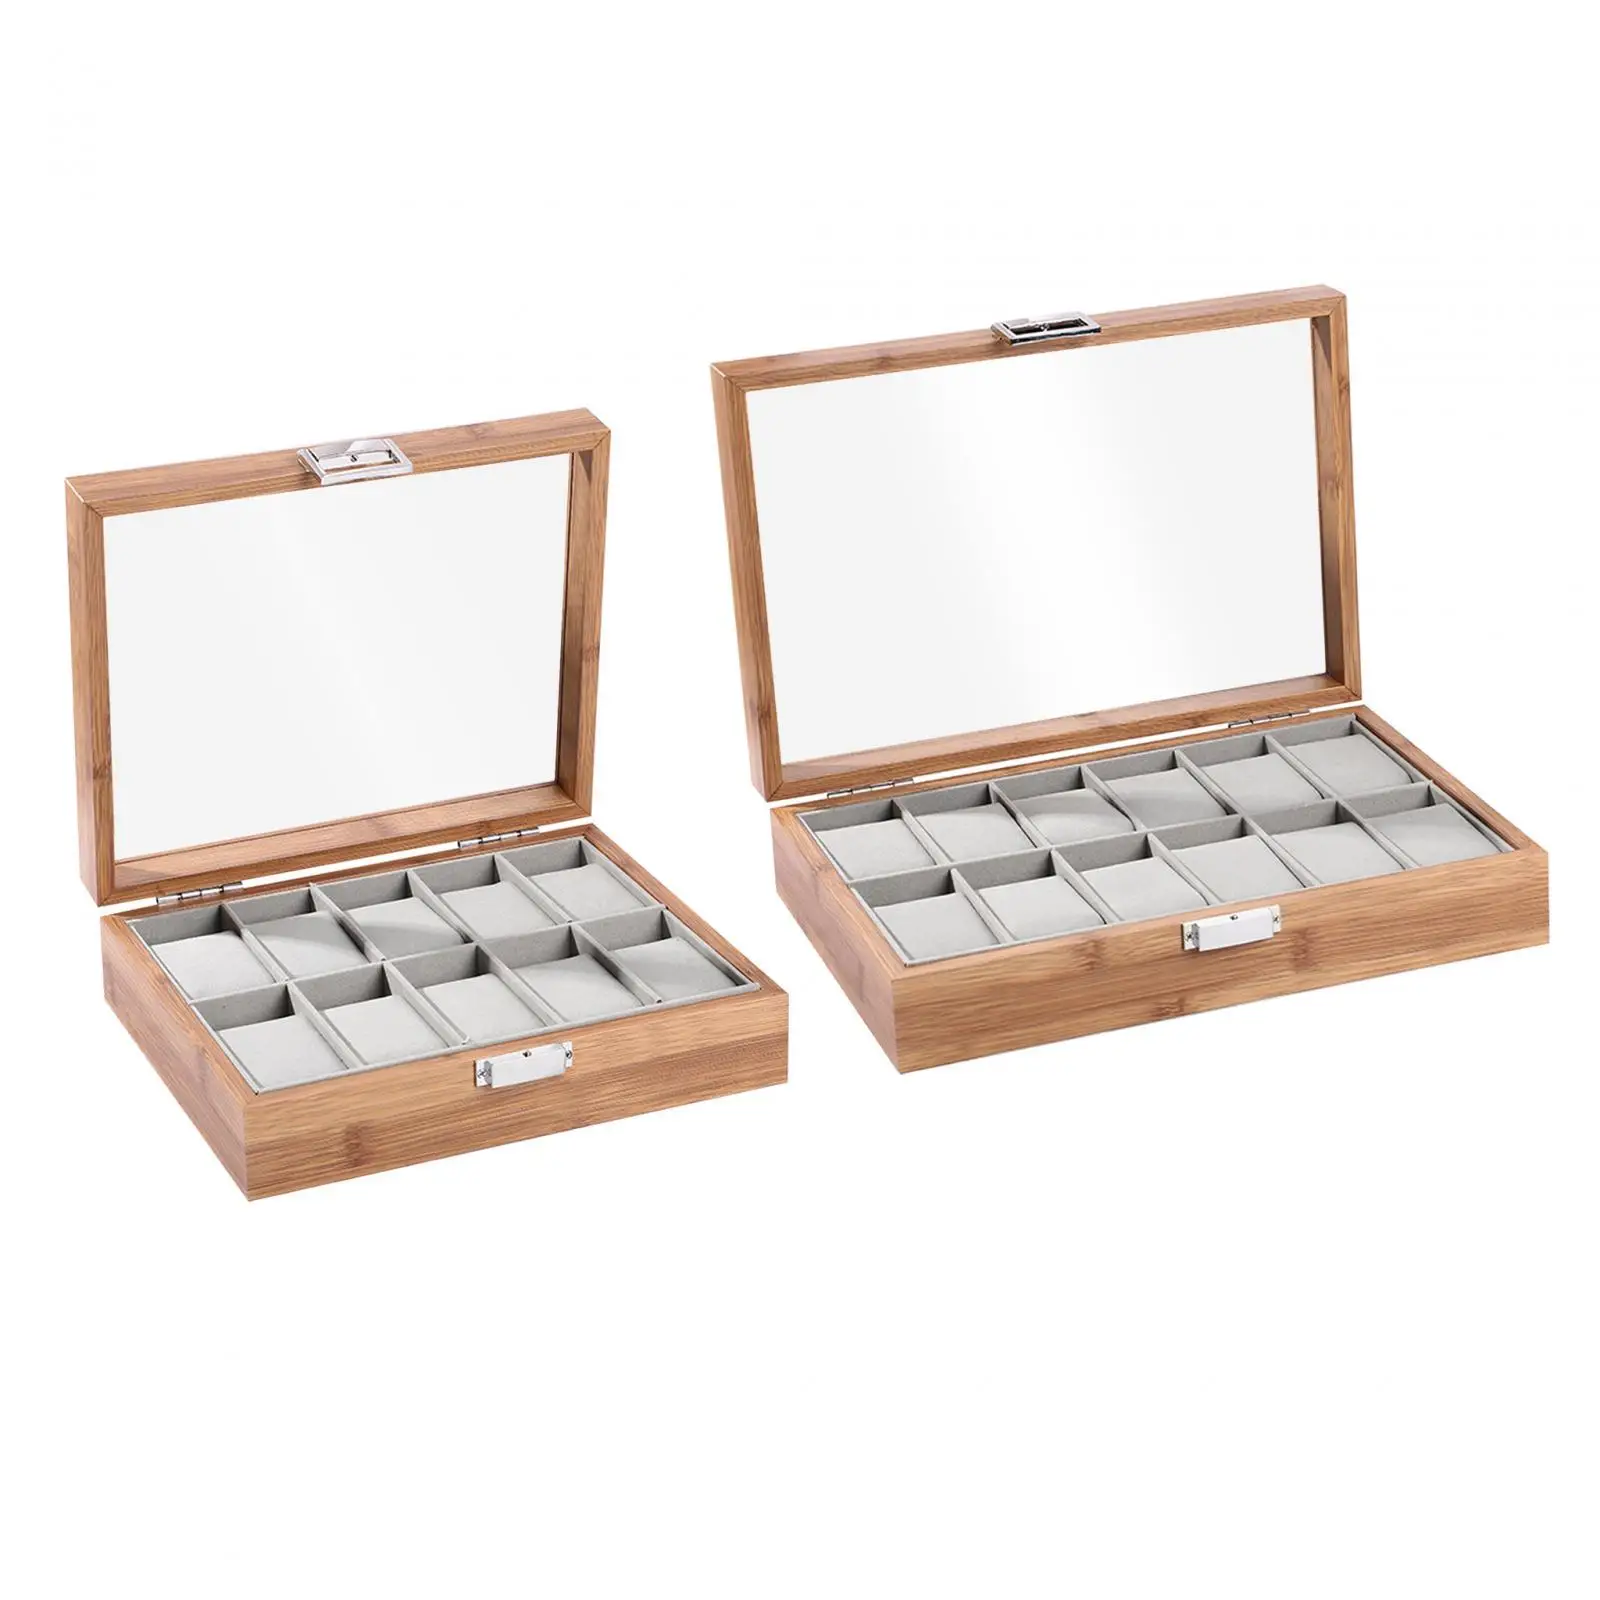 Watch Box Organizer Lockable with Lid Watch Organizer Holder for Men and Women Home Decor Watches Necklace Bracelet Earrings